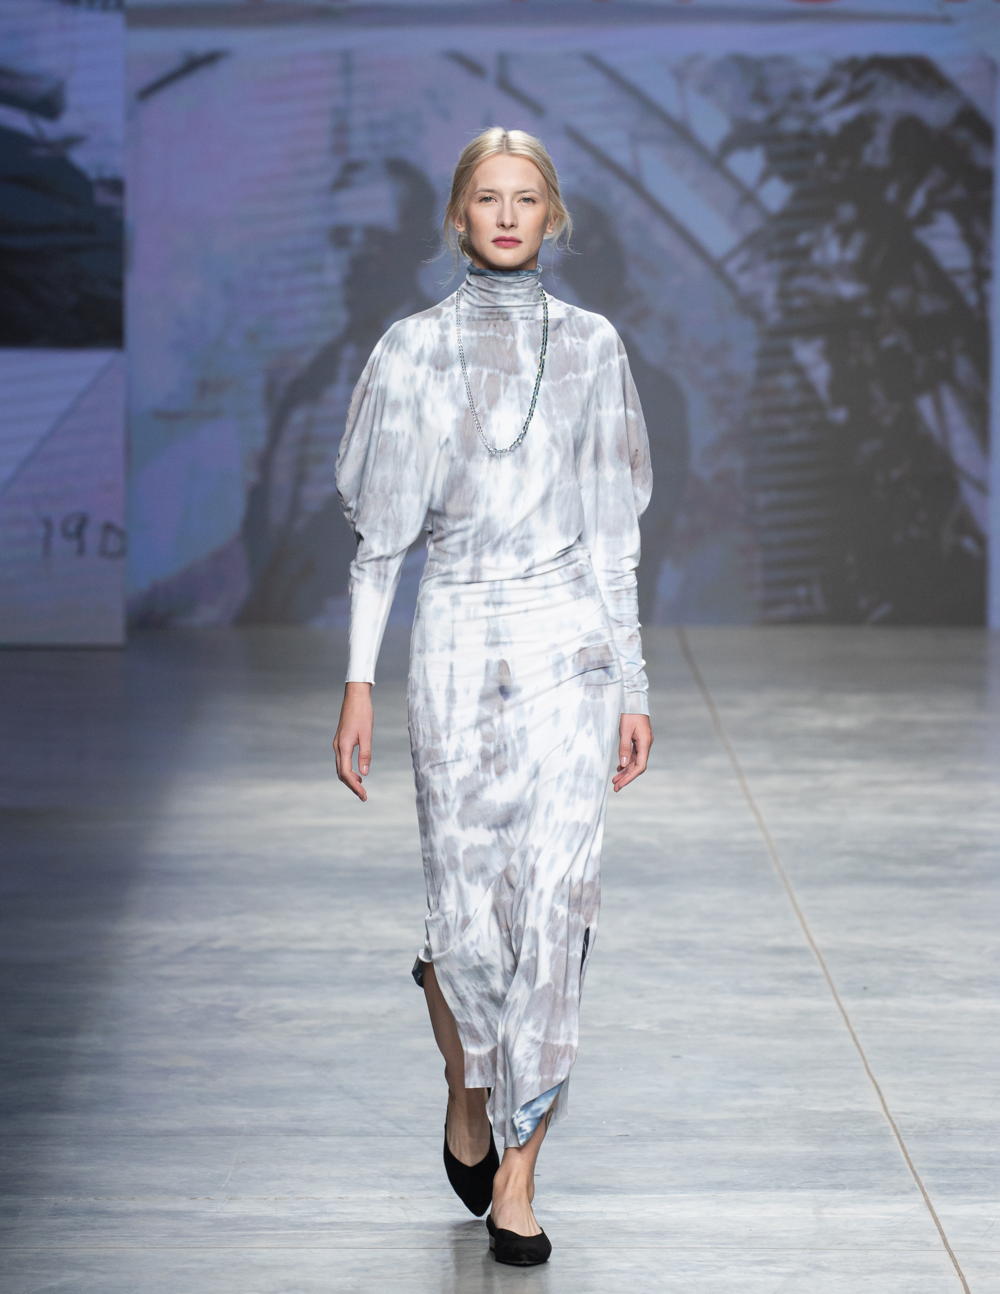 K titova, a Sustainable designer showing their SS22 collection at Mercedes-Benz Fashion Week Russia.